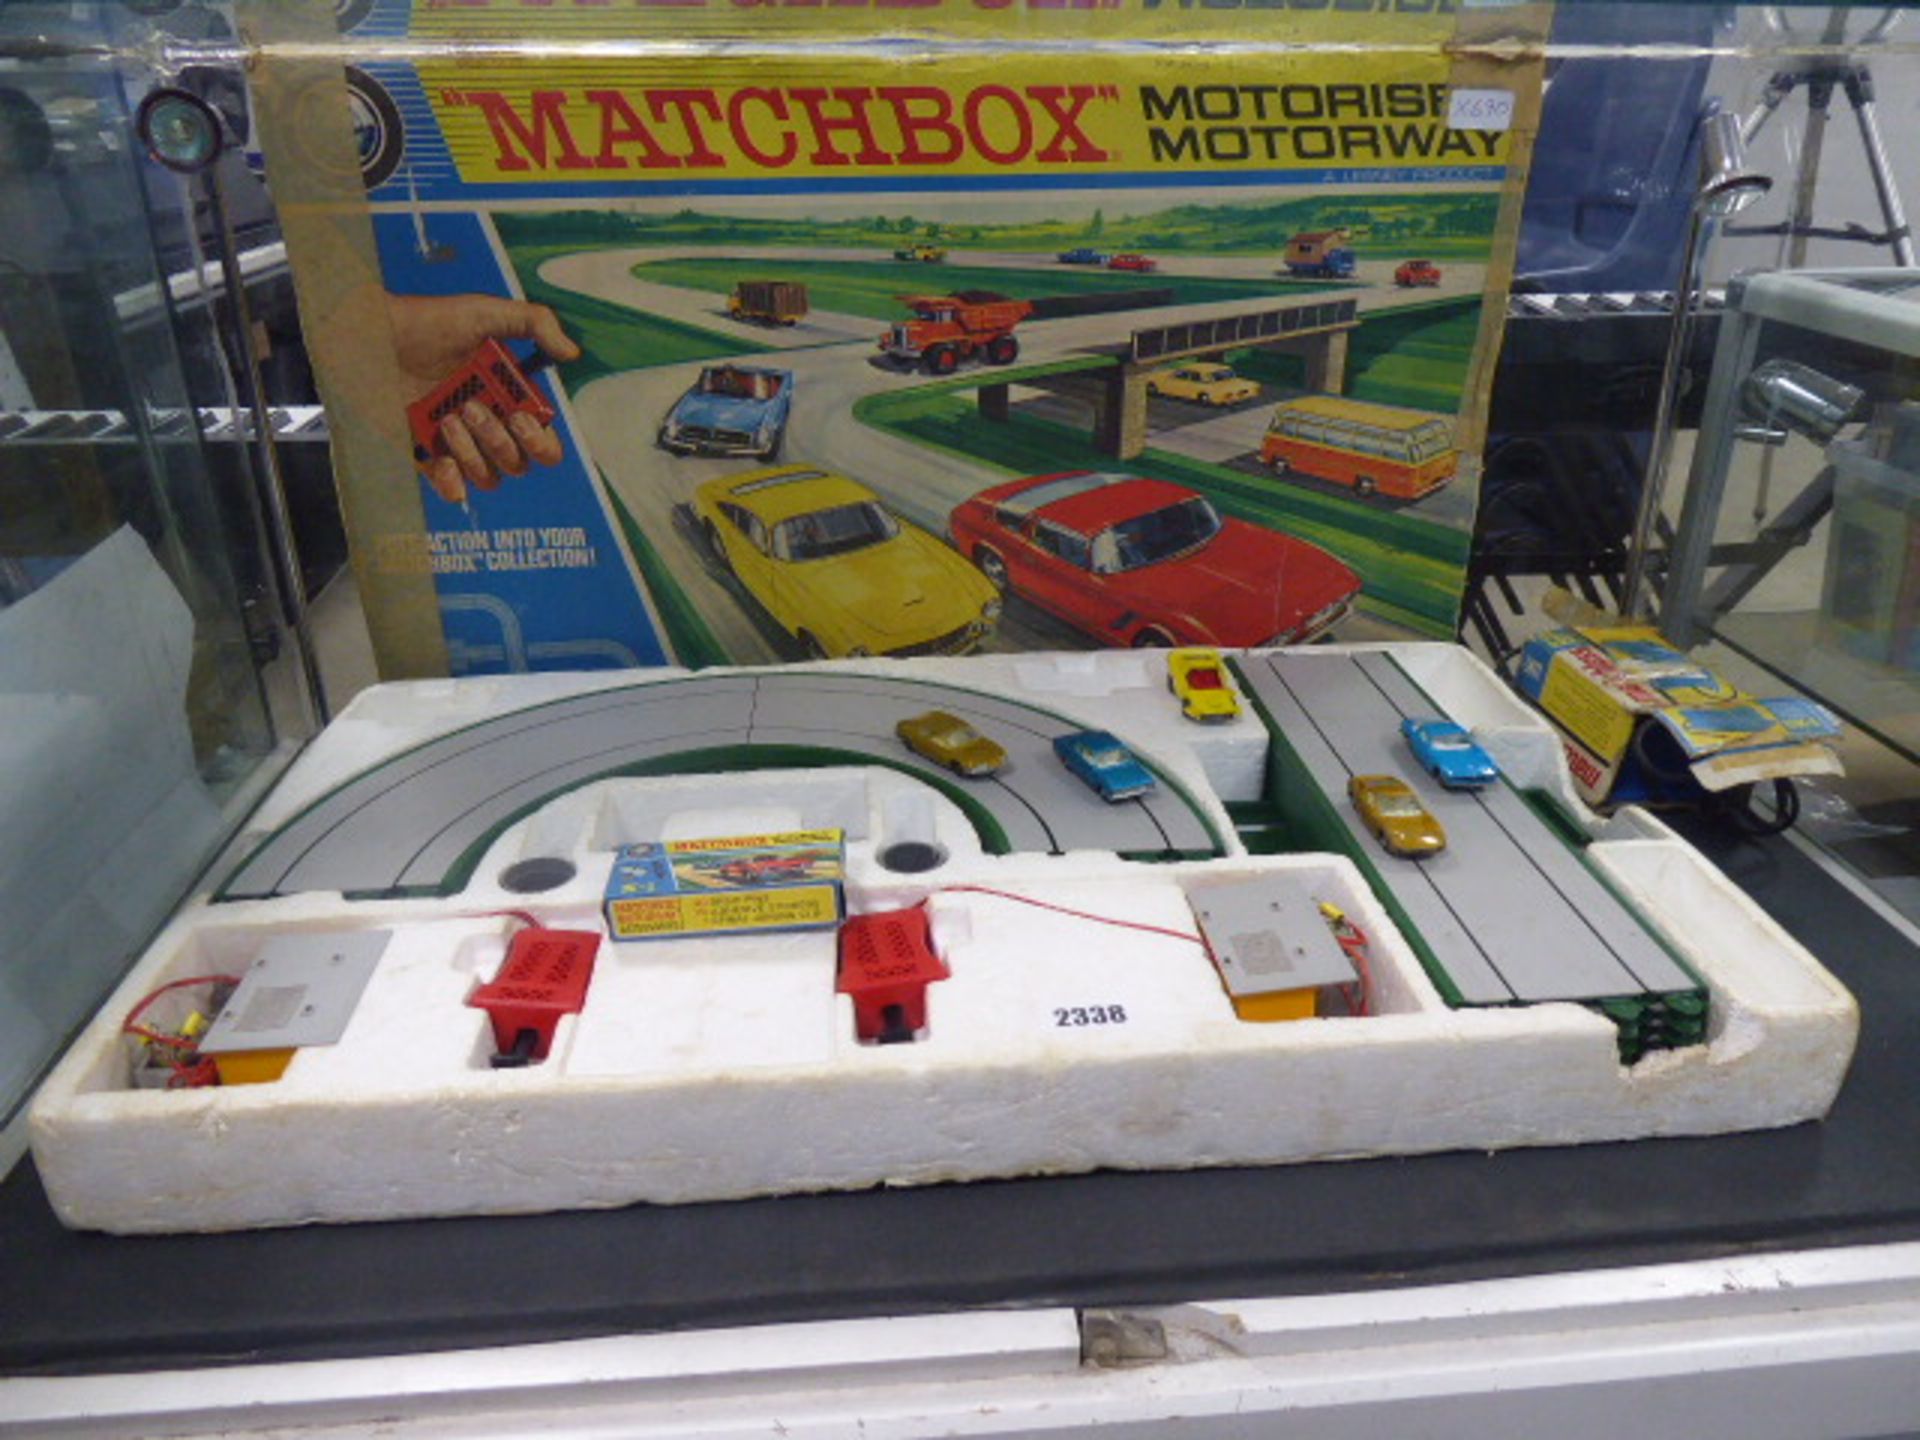 Vintage Matchbox motorised motorway playset with box, cars and power supply